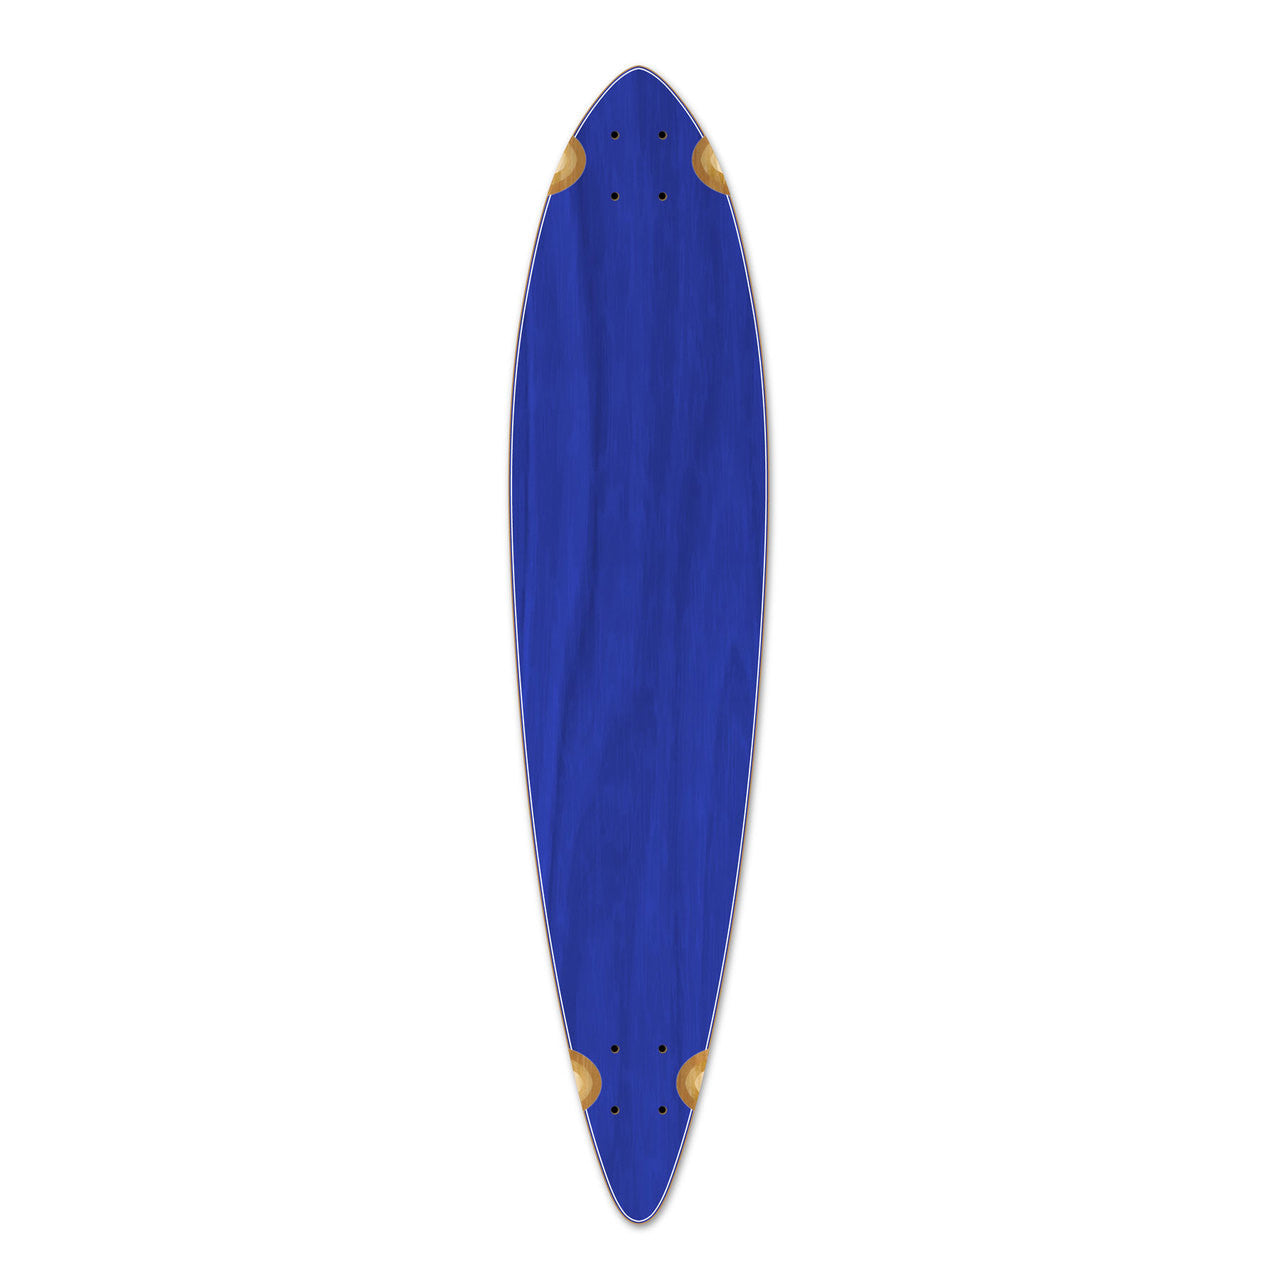 Yocaher Pintail Longboard Deck - Stained Blue